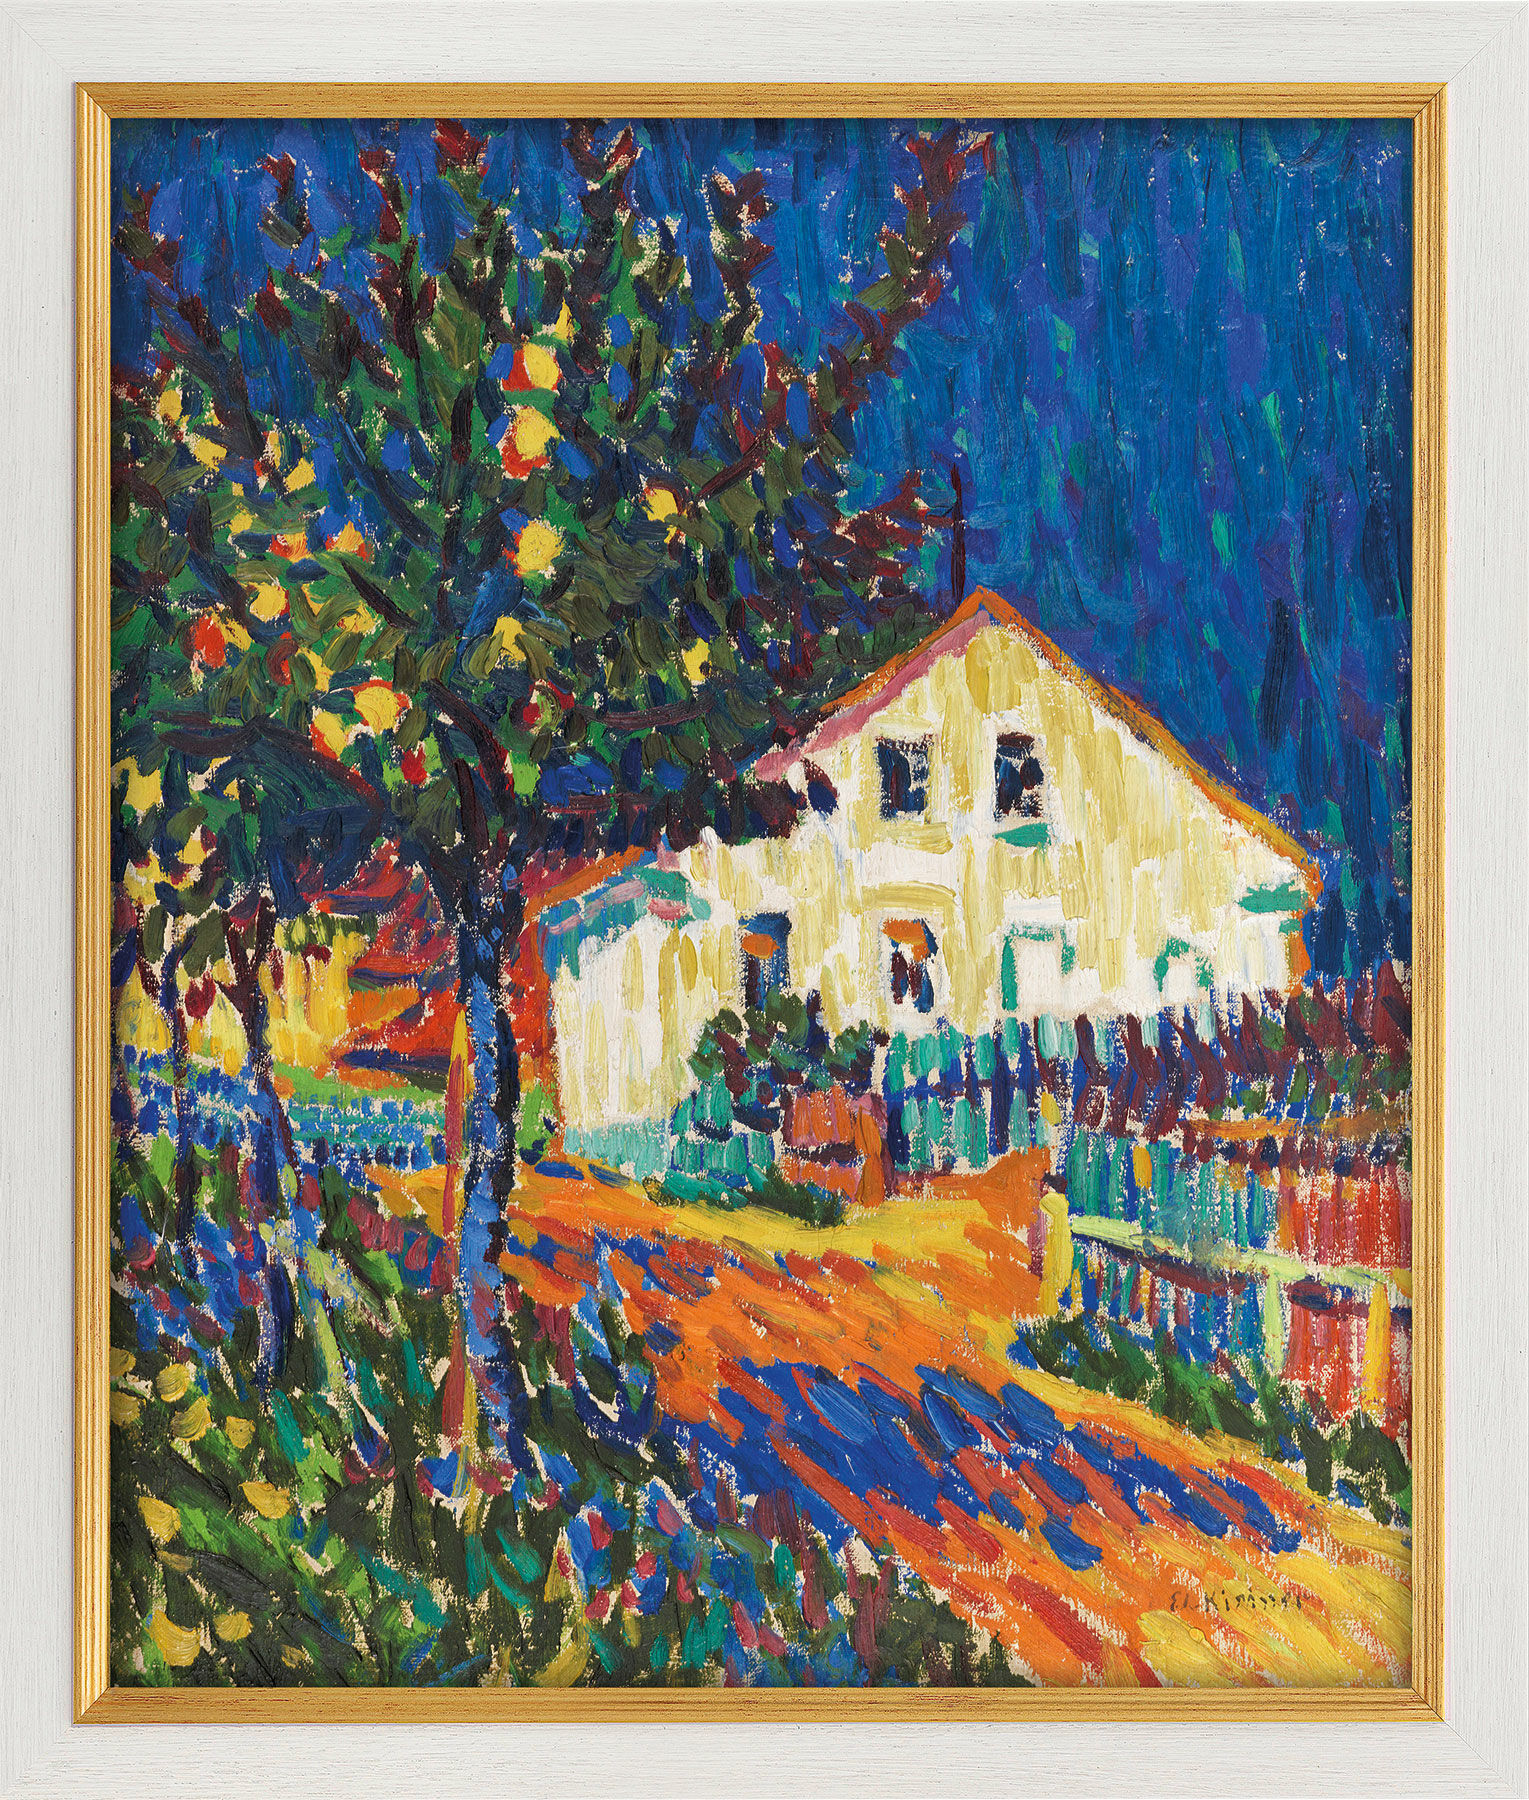 Picture "Village Street with Apple Trees" (1907), white and golden framed version by Ernst Ludwig Kirchner